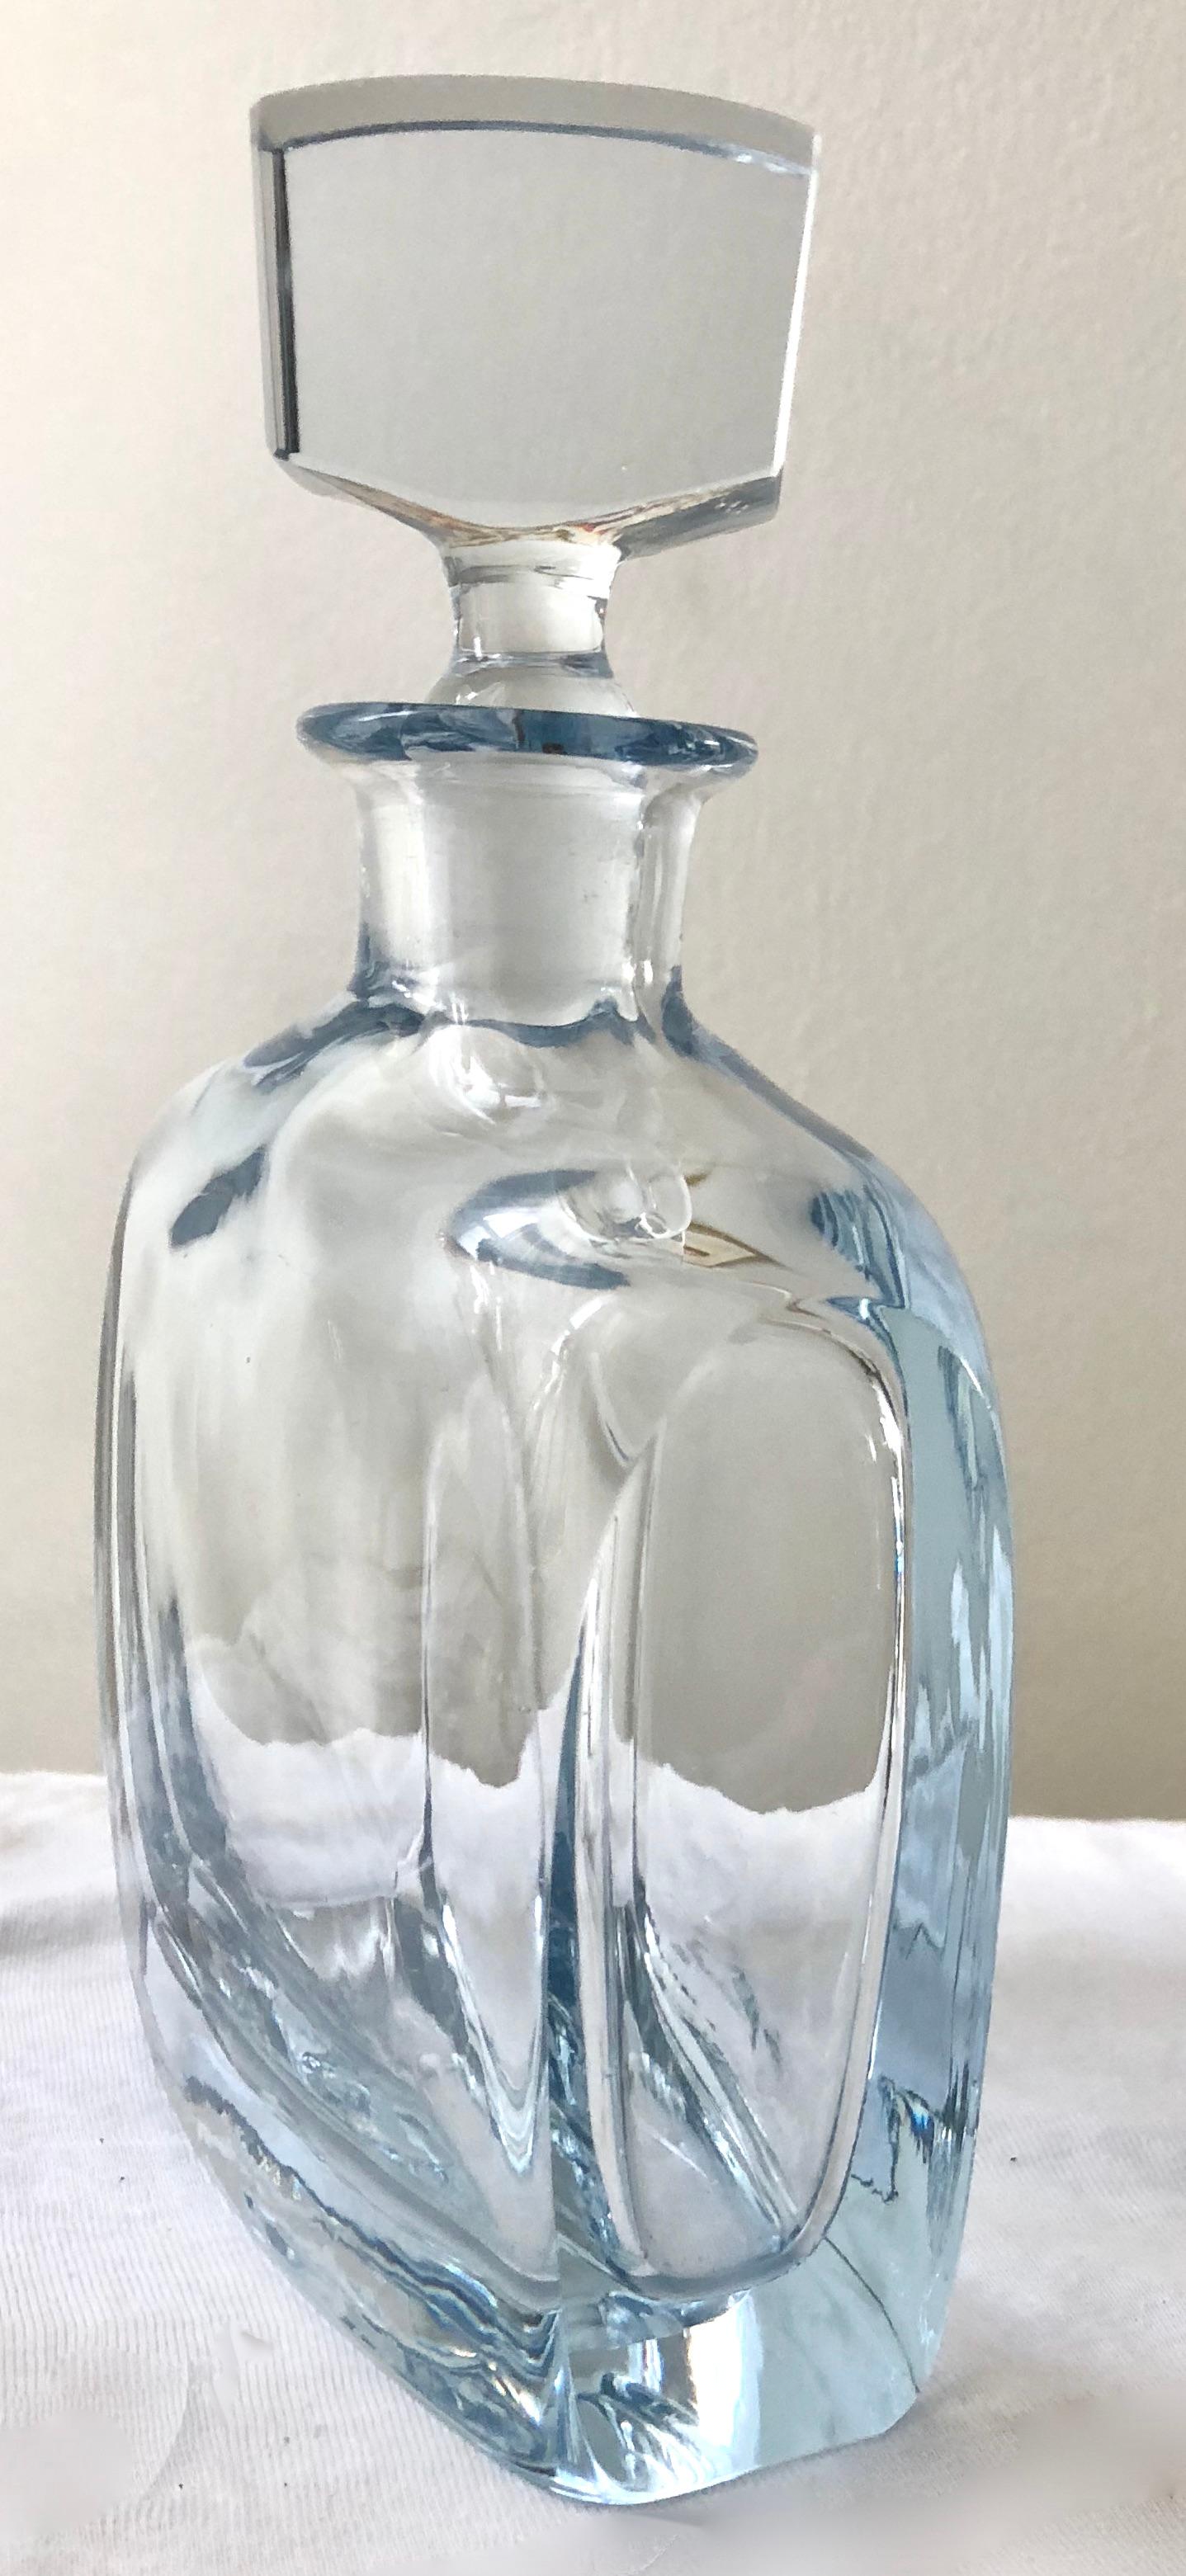 Gorgeous sculptural thick glass bottle, signed, with heavy solid glass stopper. Irresistible.

Courtesy of Pam at WhimsicalVintage:

The Swedish designs of Strombergshyttan are unmistakable. Clean, modern designs of outstanding quality. Founded in